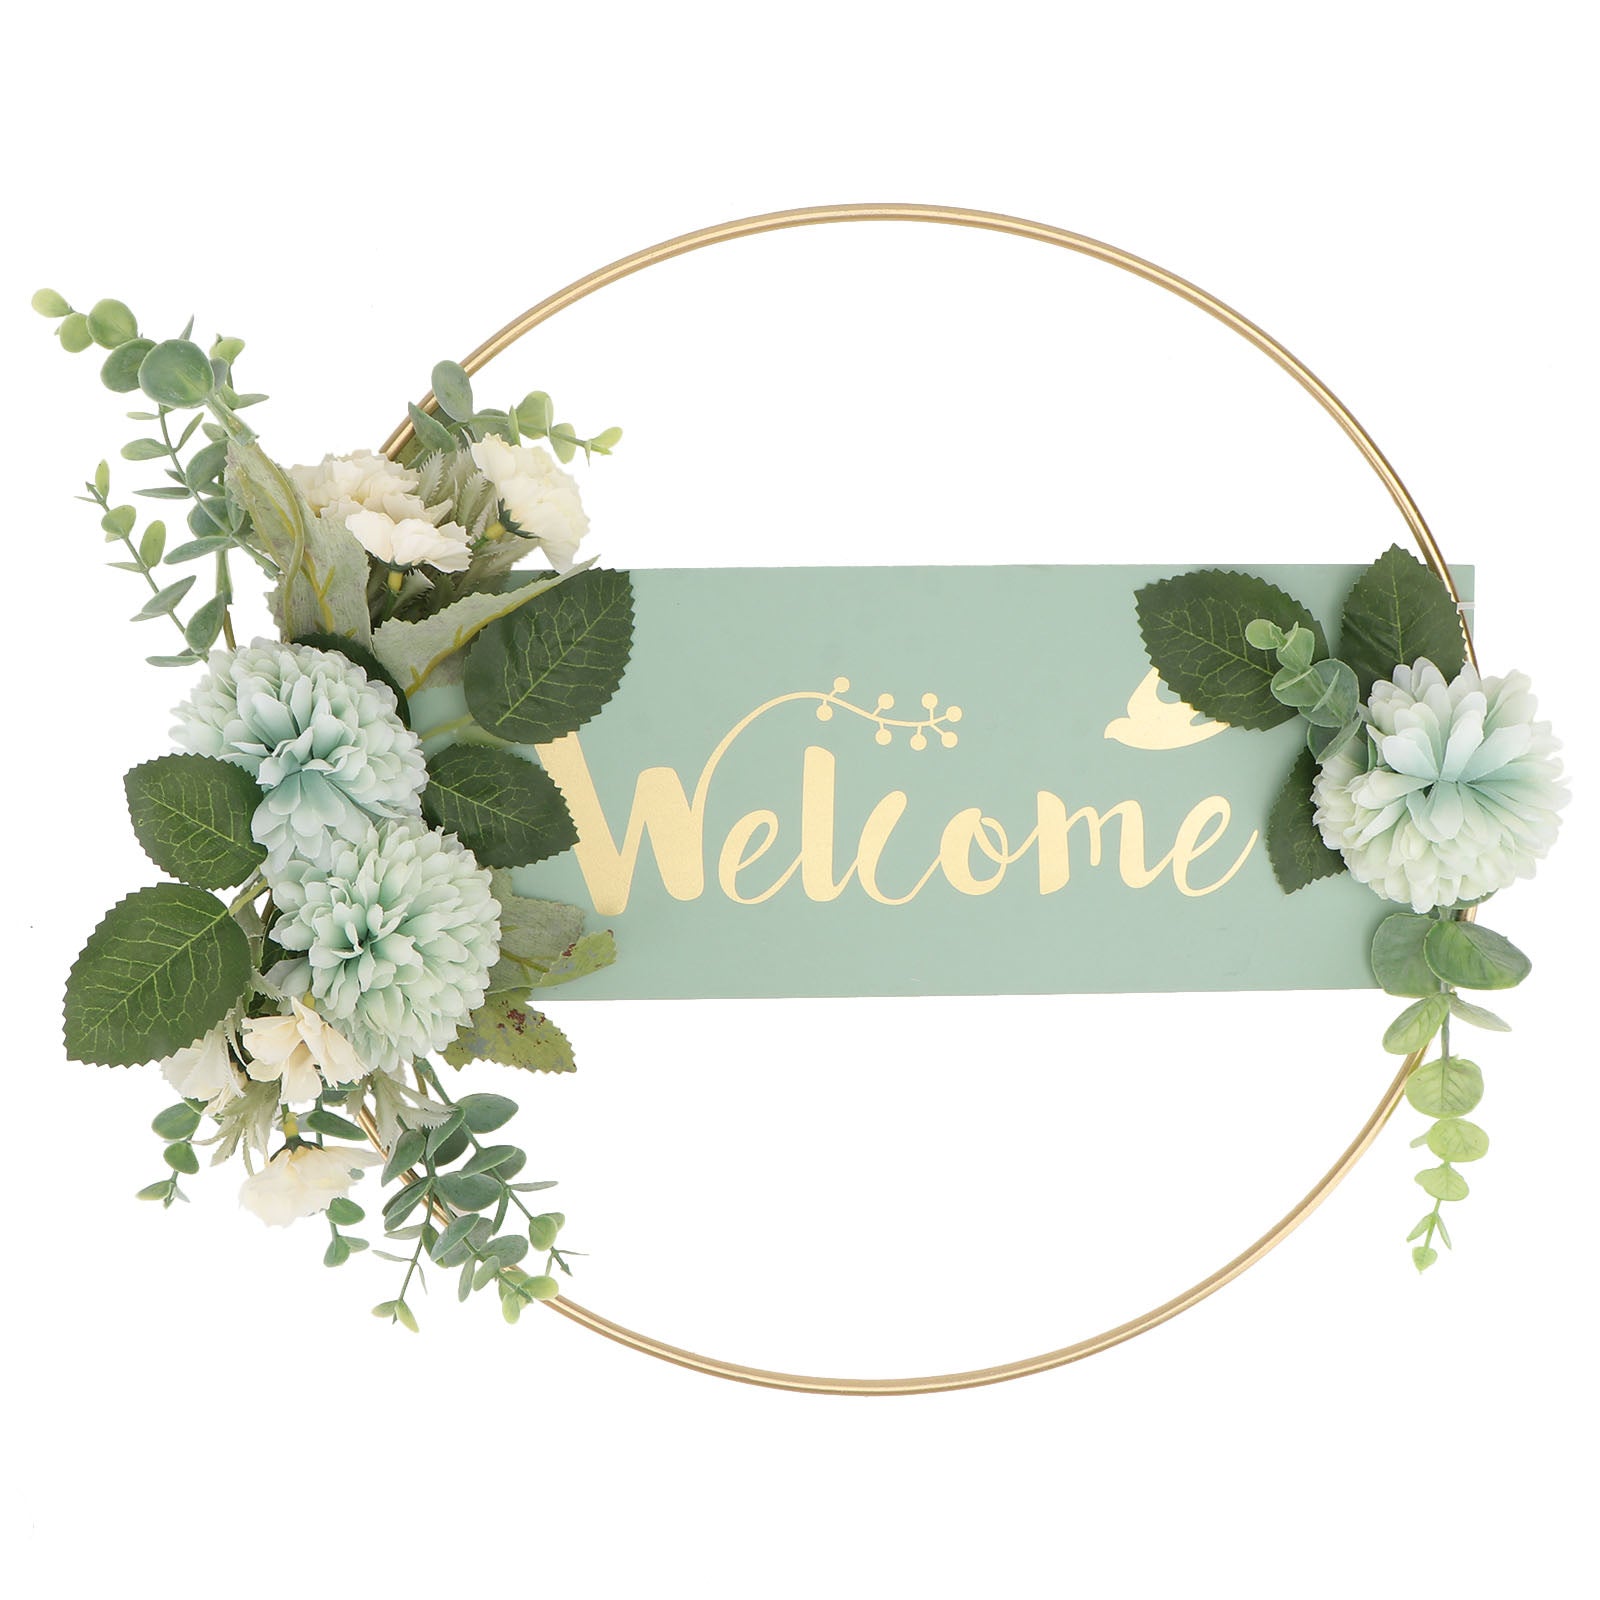 Welcome Sign Window Wall Decoration Garland, Outdoor and Indoor Christmas decorations Items, Christmas ornaments, Christmas tree decorations, salt dough ornaments, Christmas window decorations, cheap Christmas decorations, snowmen, and ornaments.